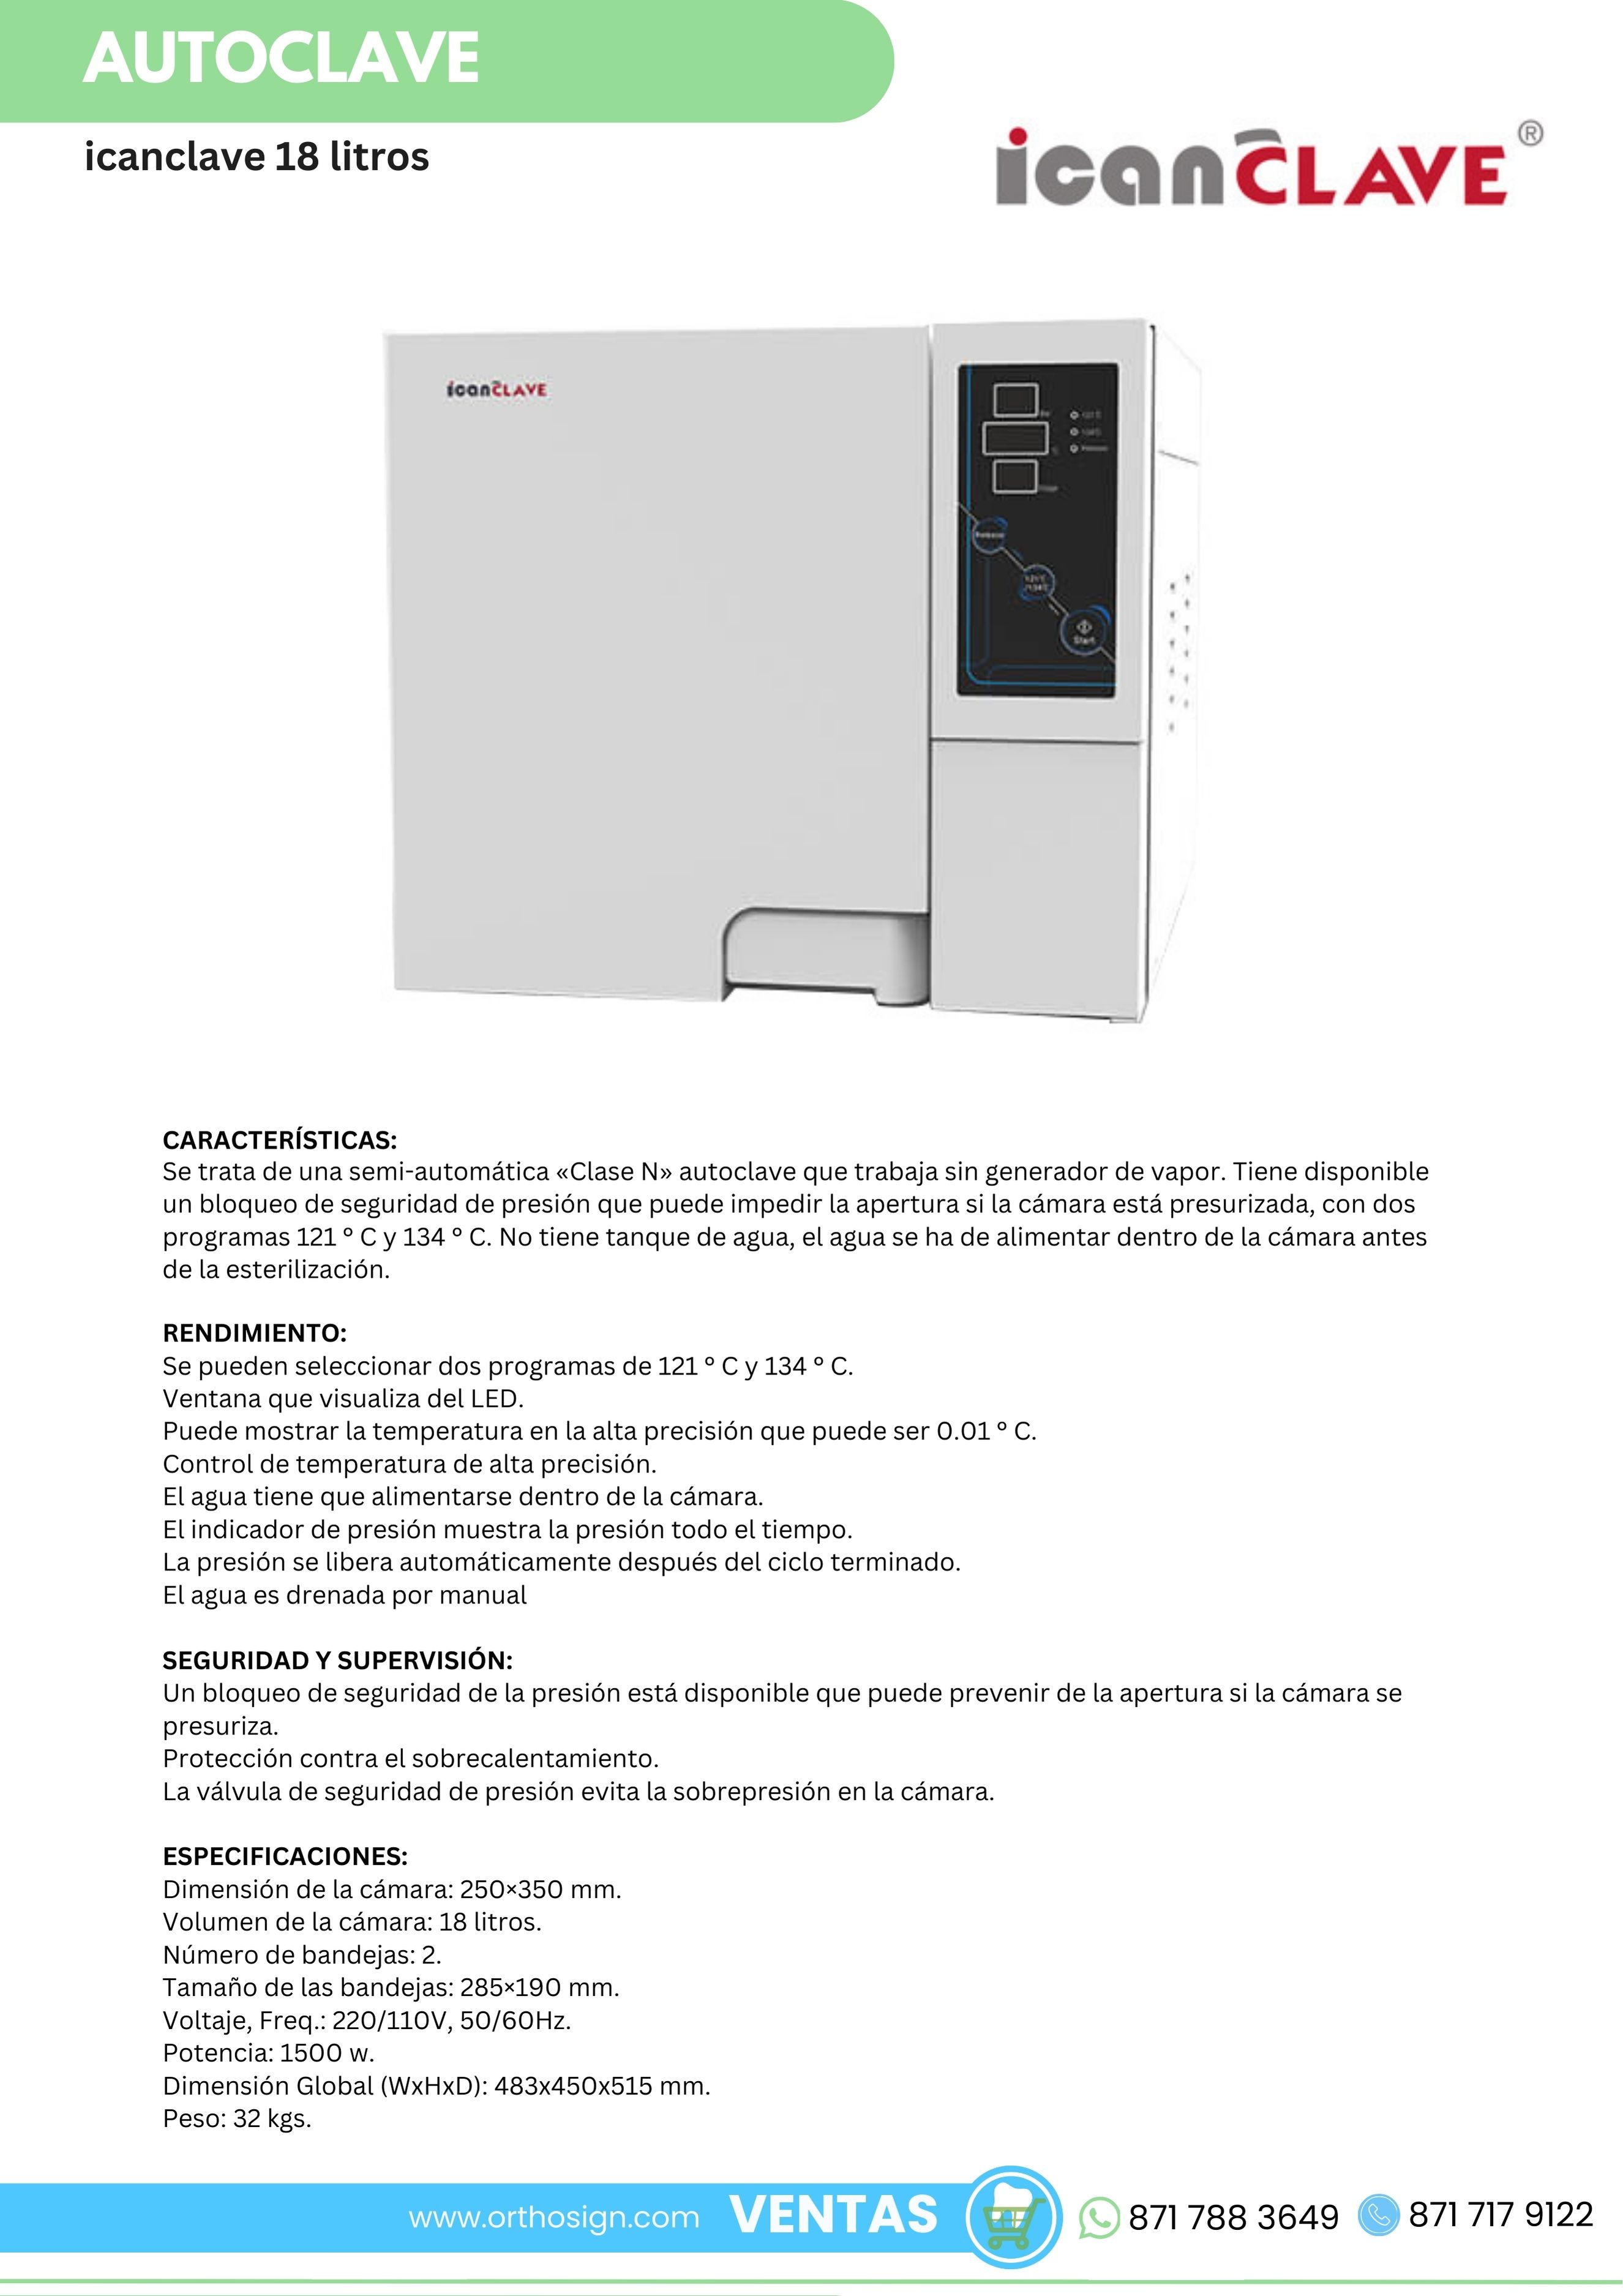 Autoclave IcanClave 18 Litros - Orthosign